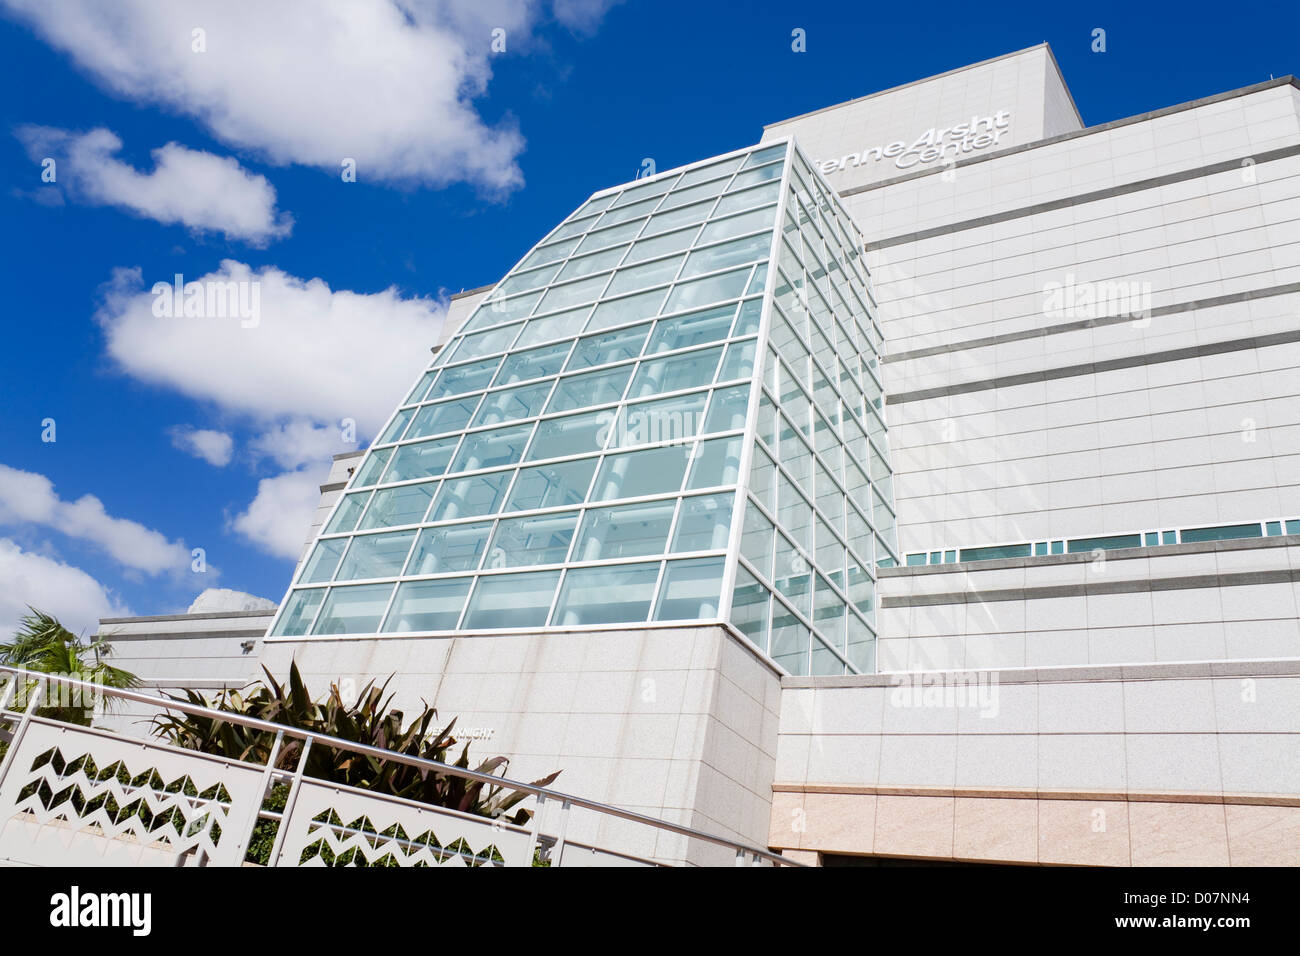 Adrienne Arsht Center for the Performing Arts,Miami,Floride,USA Banque D'Images